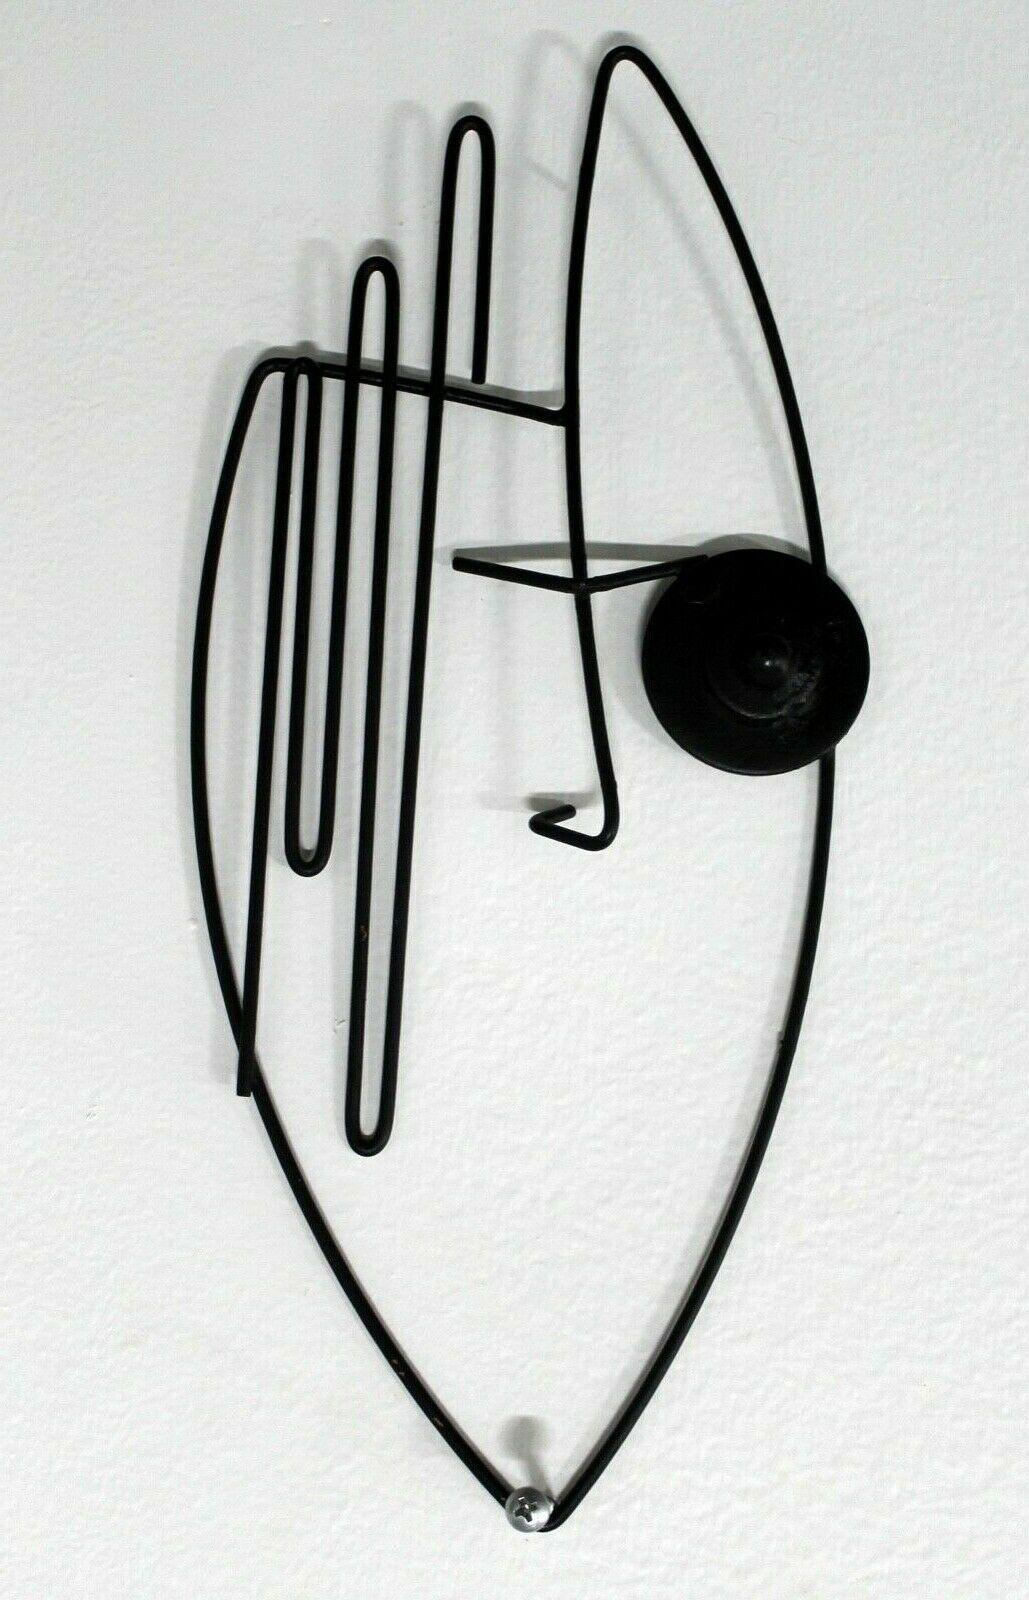 Circa the 1950's, Le Shoppe Too in Michigan brings you this amazing abstract wall sculpture by Frederick Weinberg. His classic style bends and forms wire to form abstract, stylized face. this piece makes a fantastic addition to any mid century